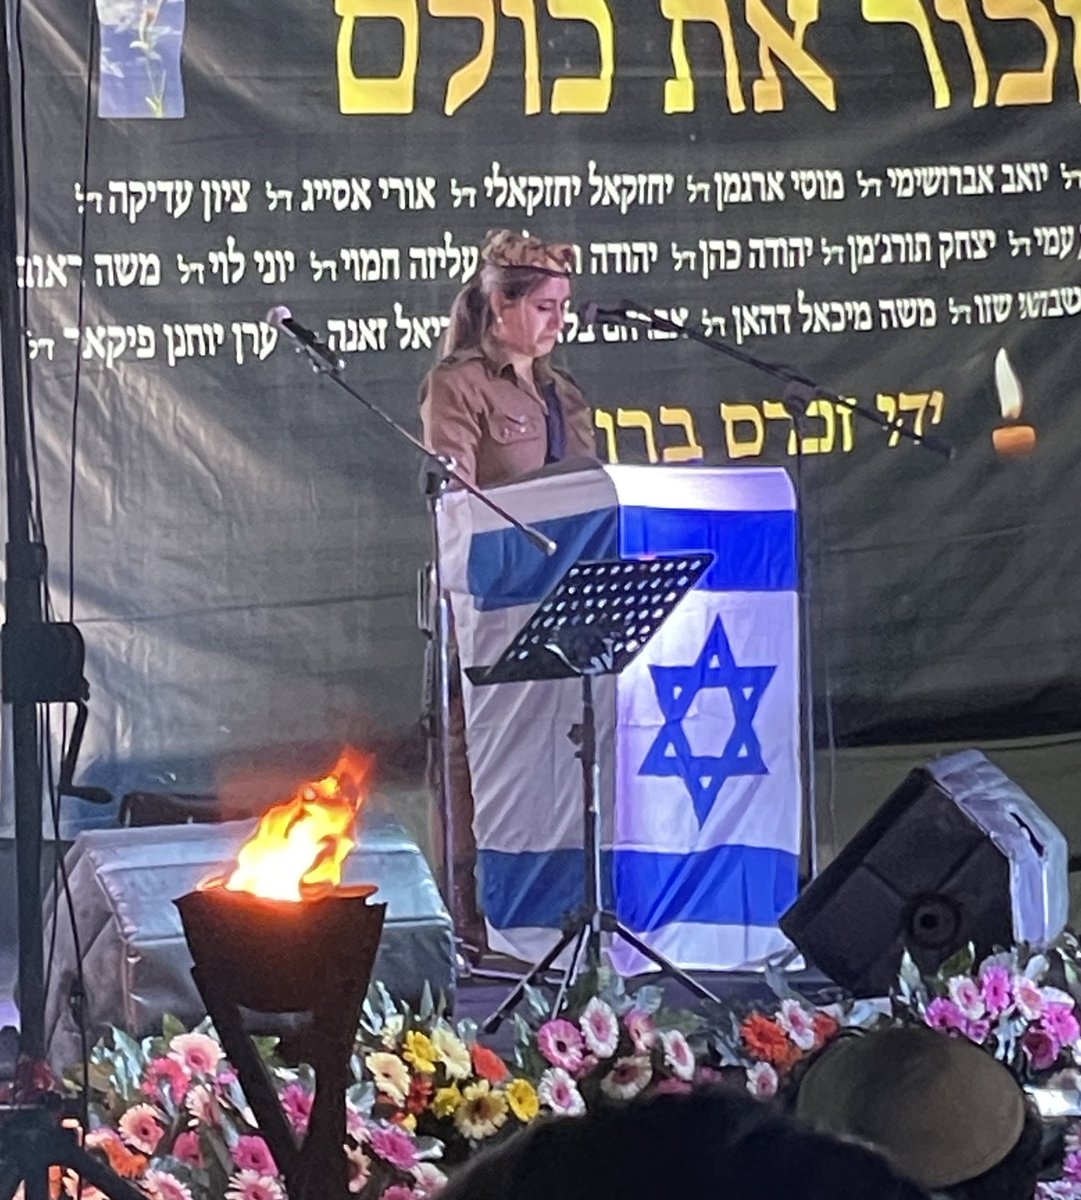 This 22-year-old officer spoke at the Yom HaZikaron (Memorial Day) ceremony in my neighborhood. She is the niece of an uncle she never met, killed before she was born, and she lost several soldiers on October 7. I cannot imagine carrying so much pain at such a young age.